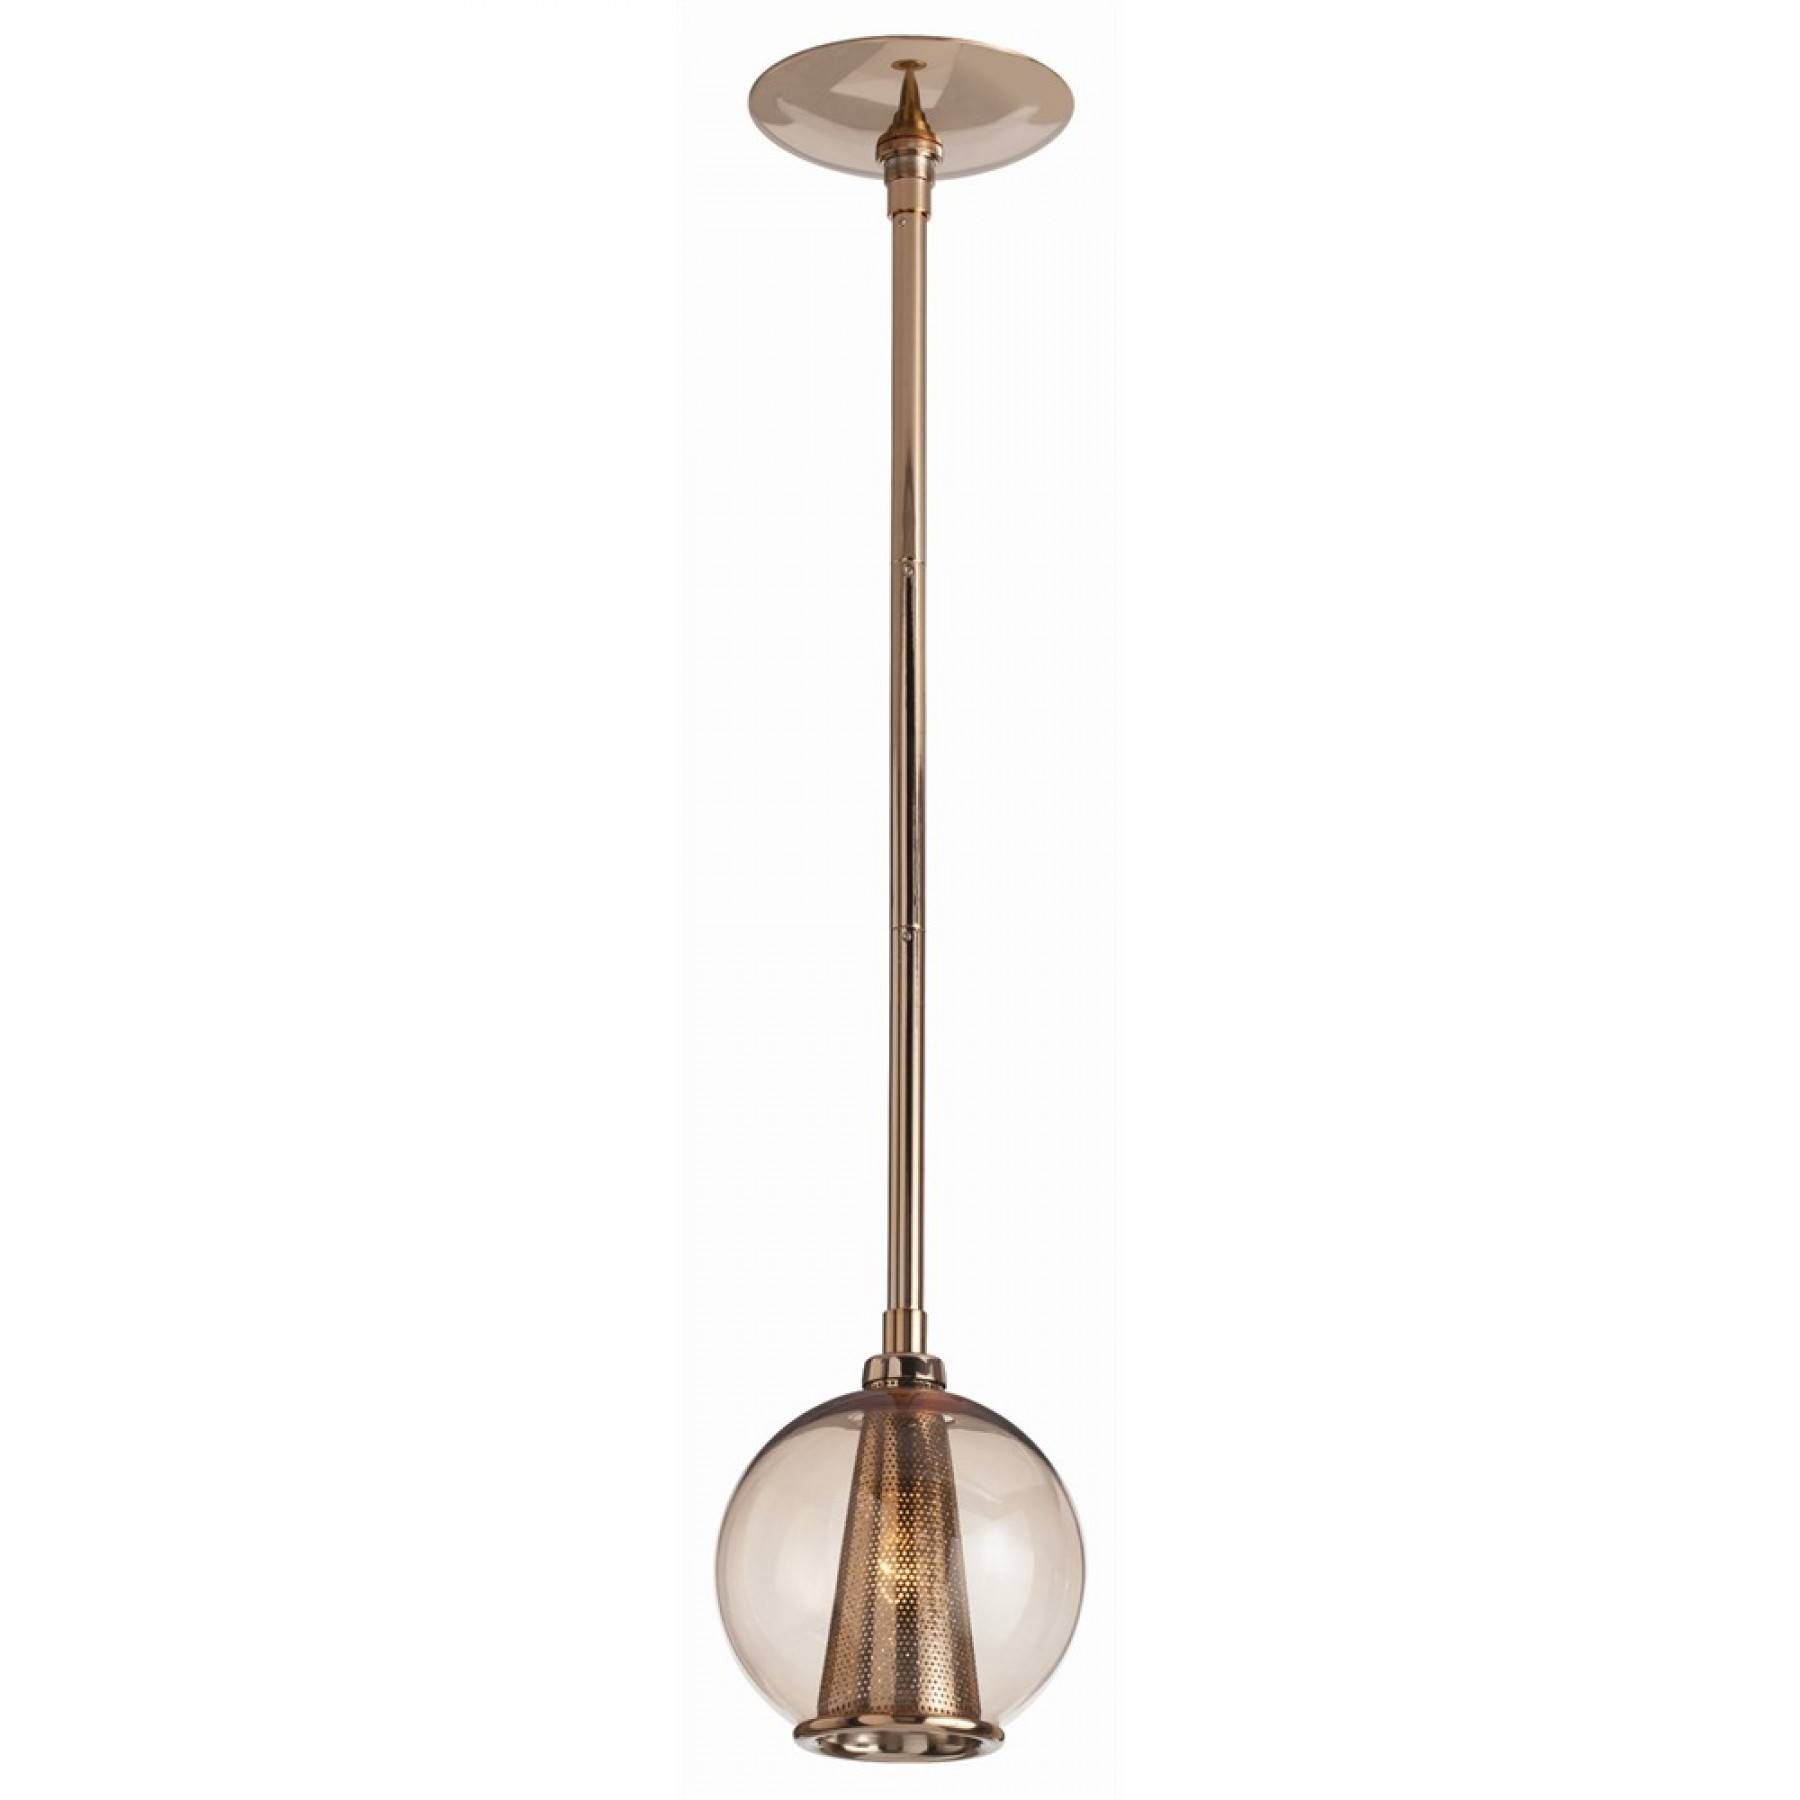 Adjustable Small Pendant Within Caviar Lights Fixtures (View 9 of 15)